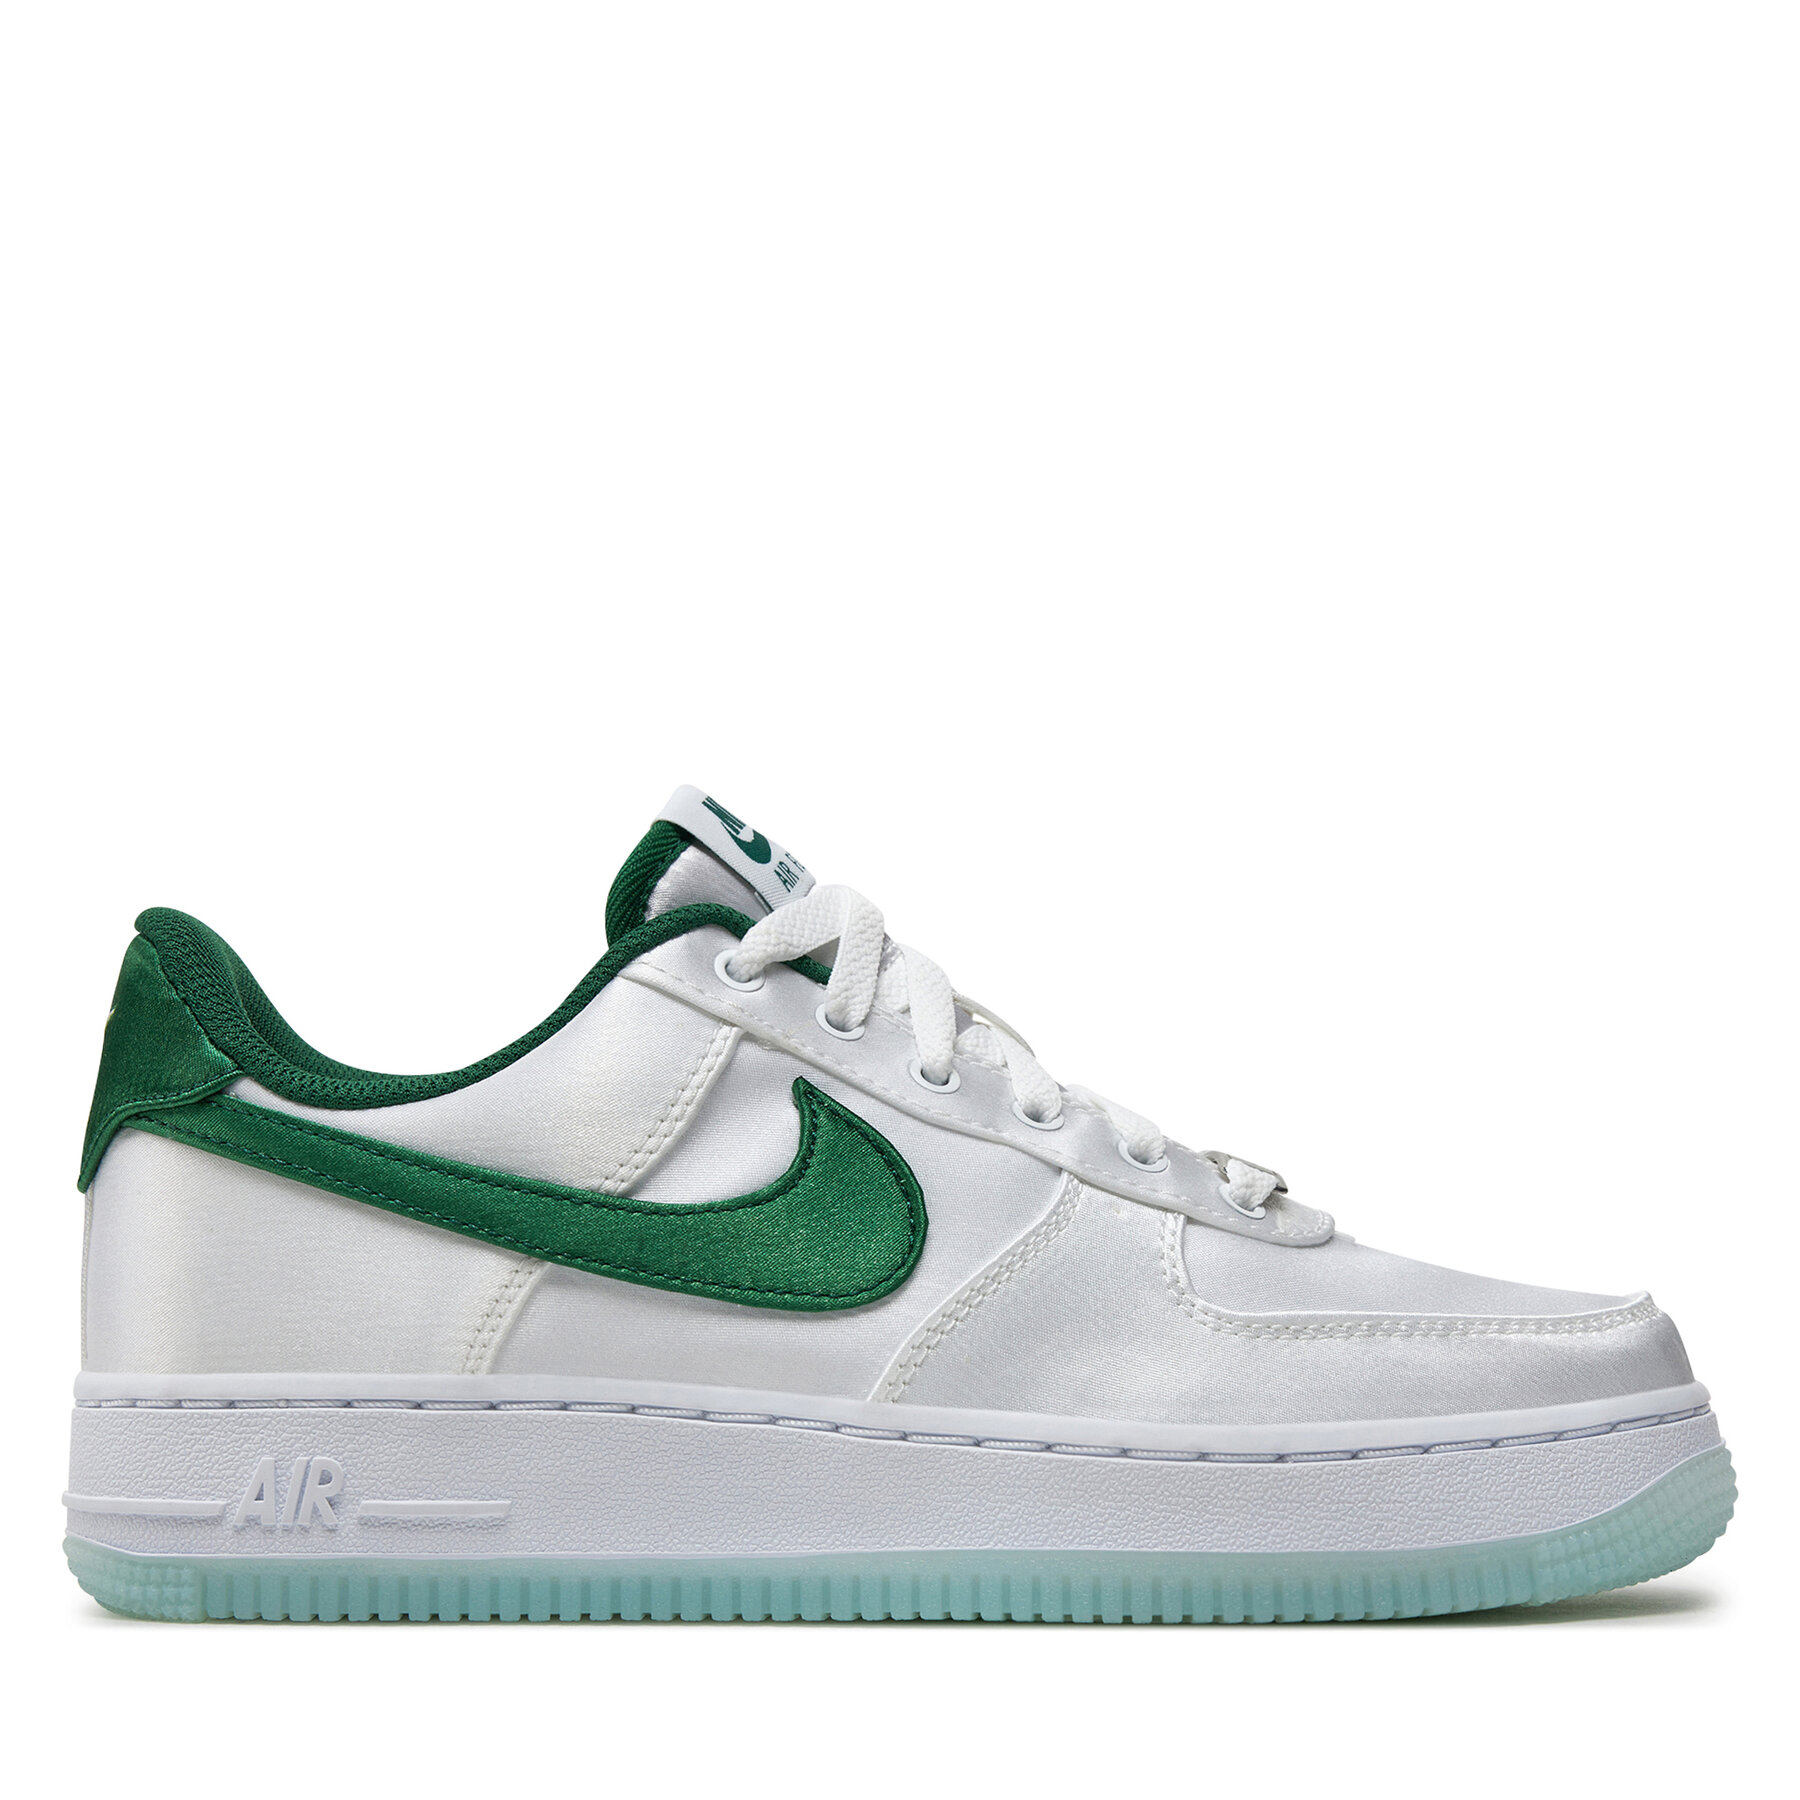 Sneakers Nike Air Force 1 '07 Ess Snkr DX6541 101 Blanc